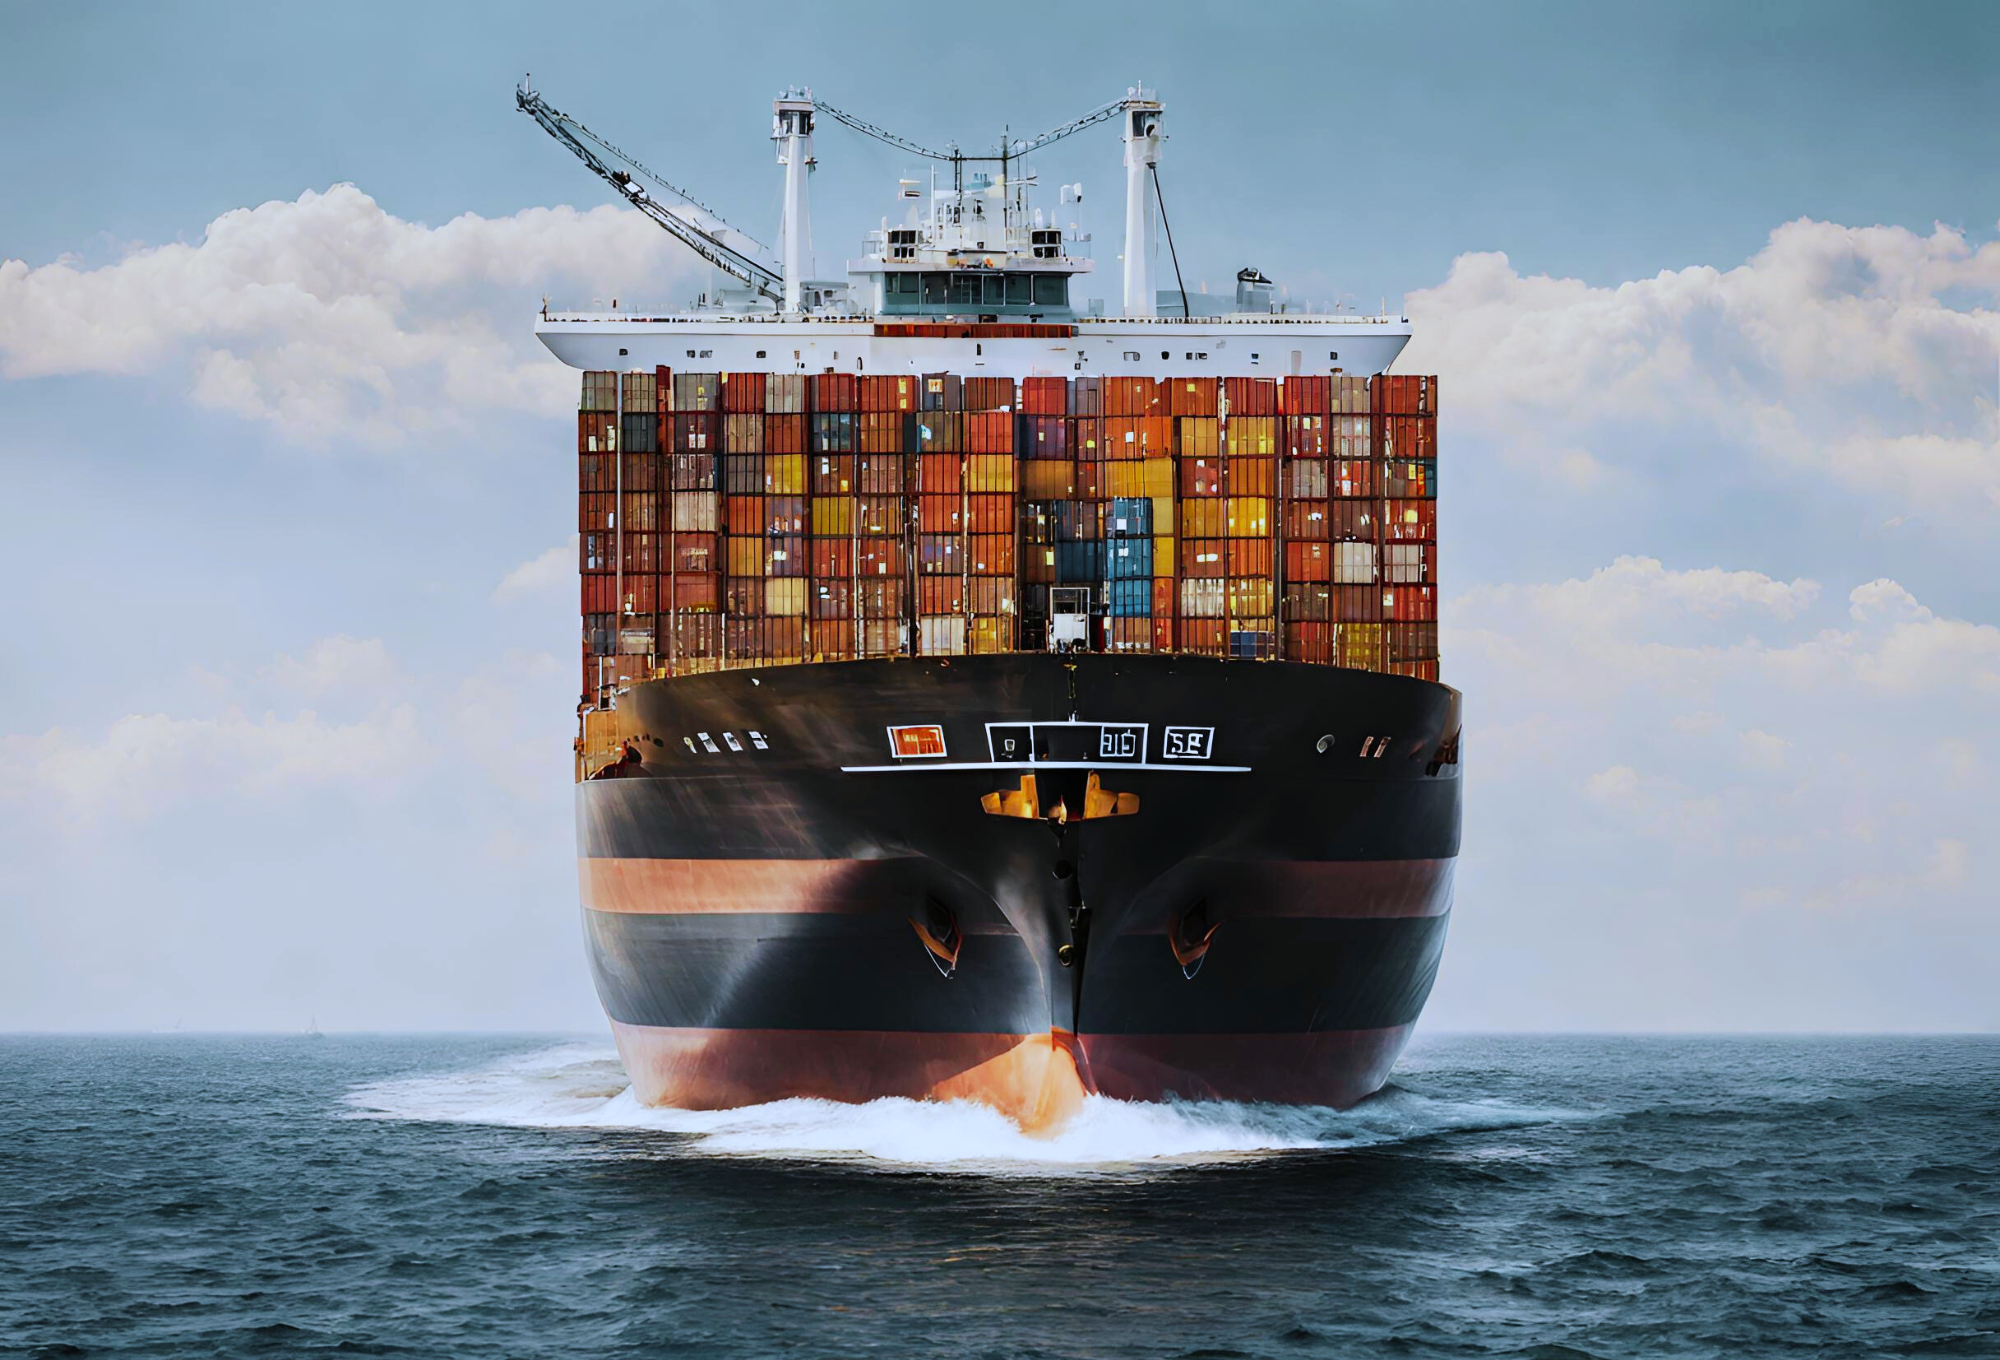 Shipping Magnate Presents: “What’s the Hold Up in My Supply Chain?” Part Two